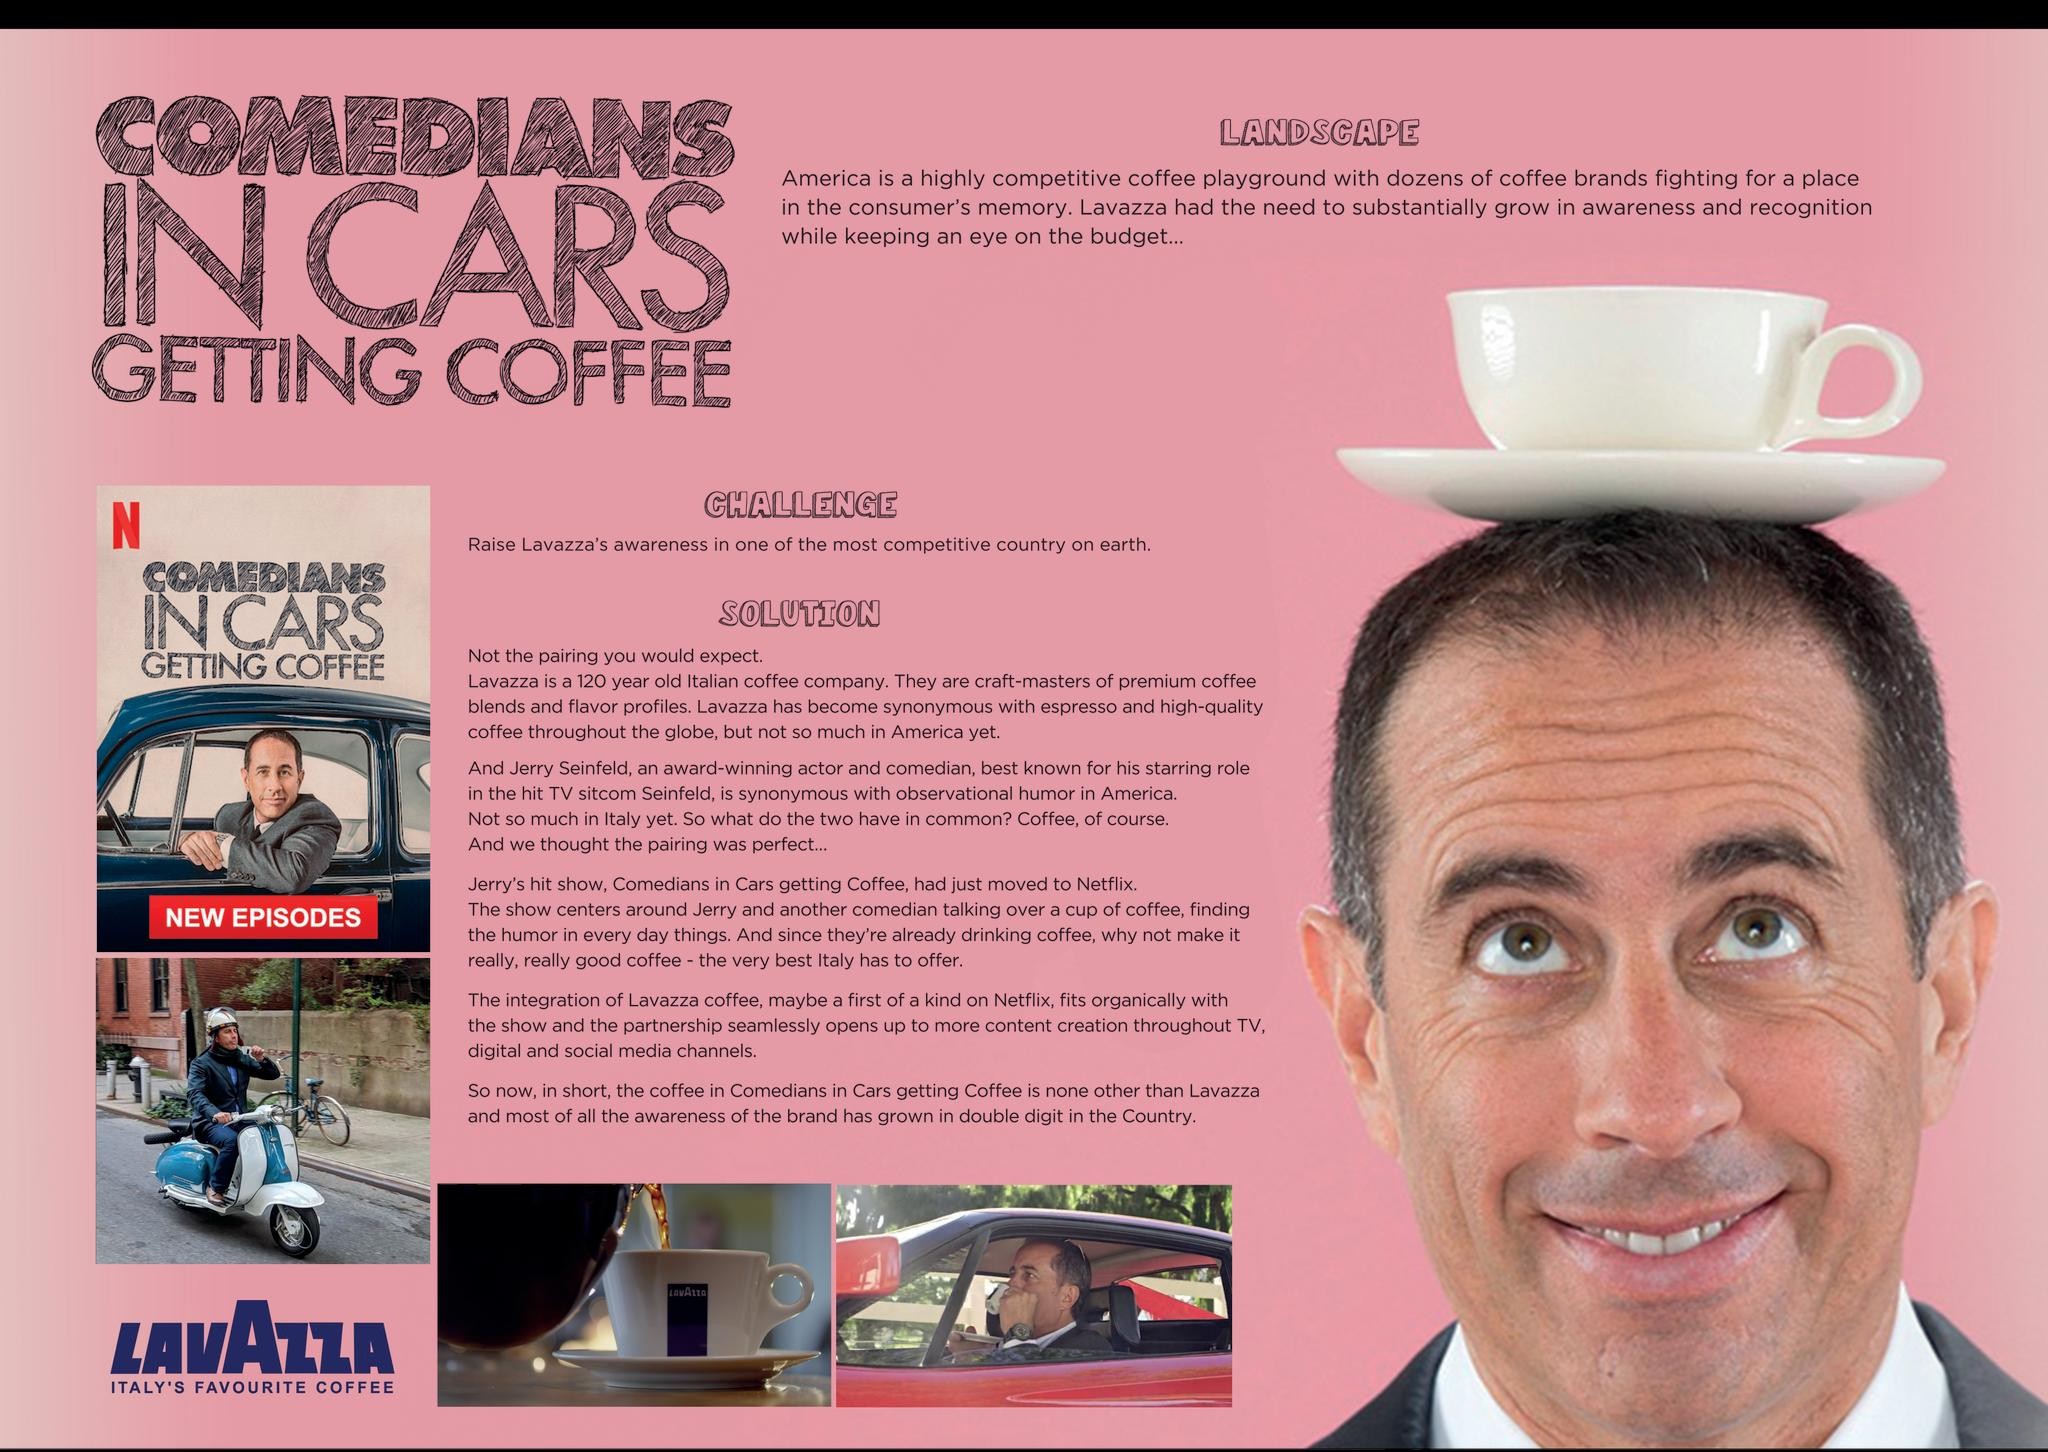 Lavazza & Comedians in cars getting coffee